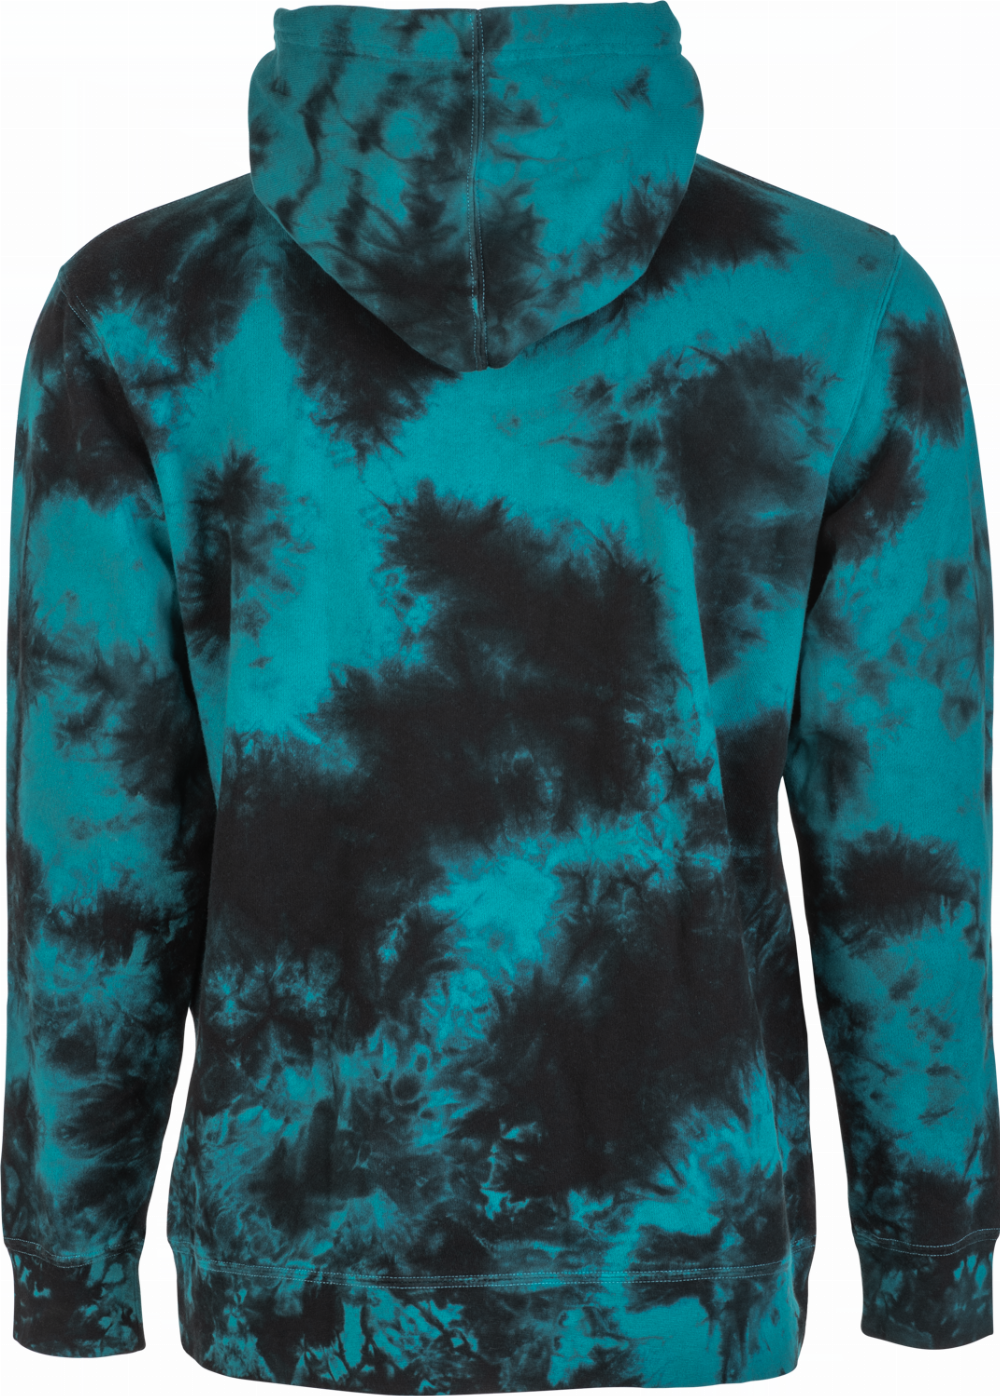 FLY TIE-DYE PULLOVER HOODIE TURQUOISE/BLACK 2X#mpn_354-02612X